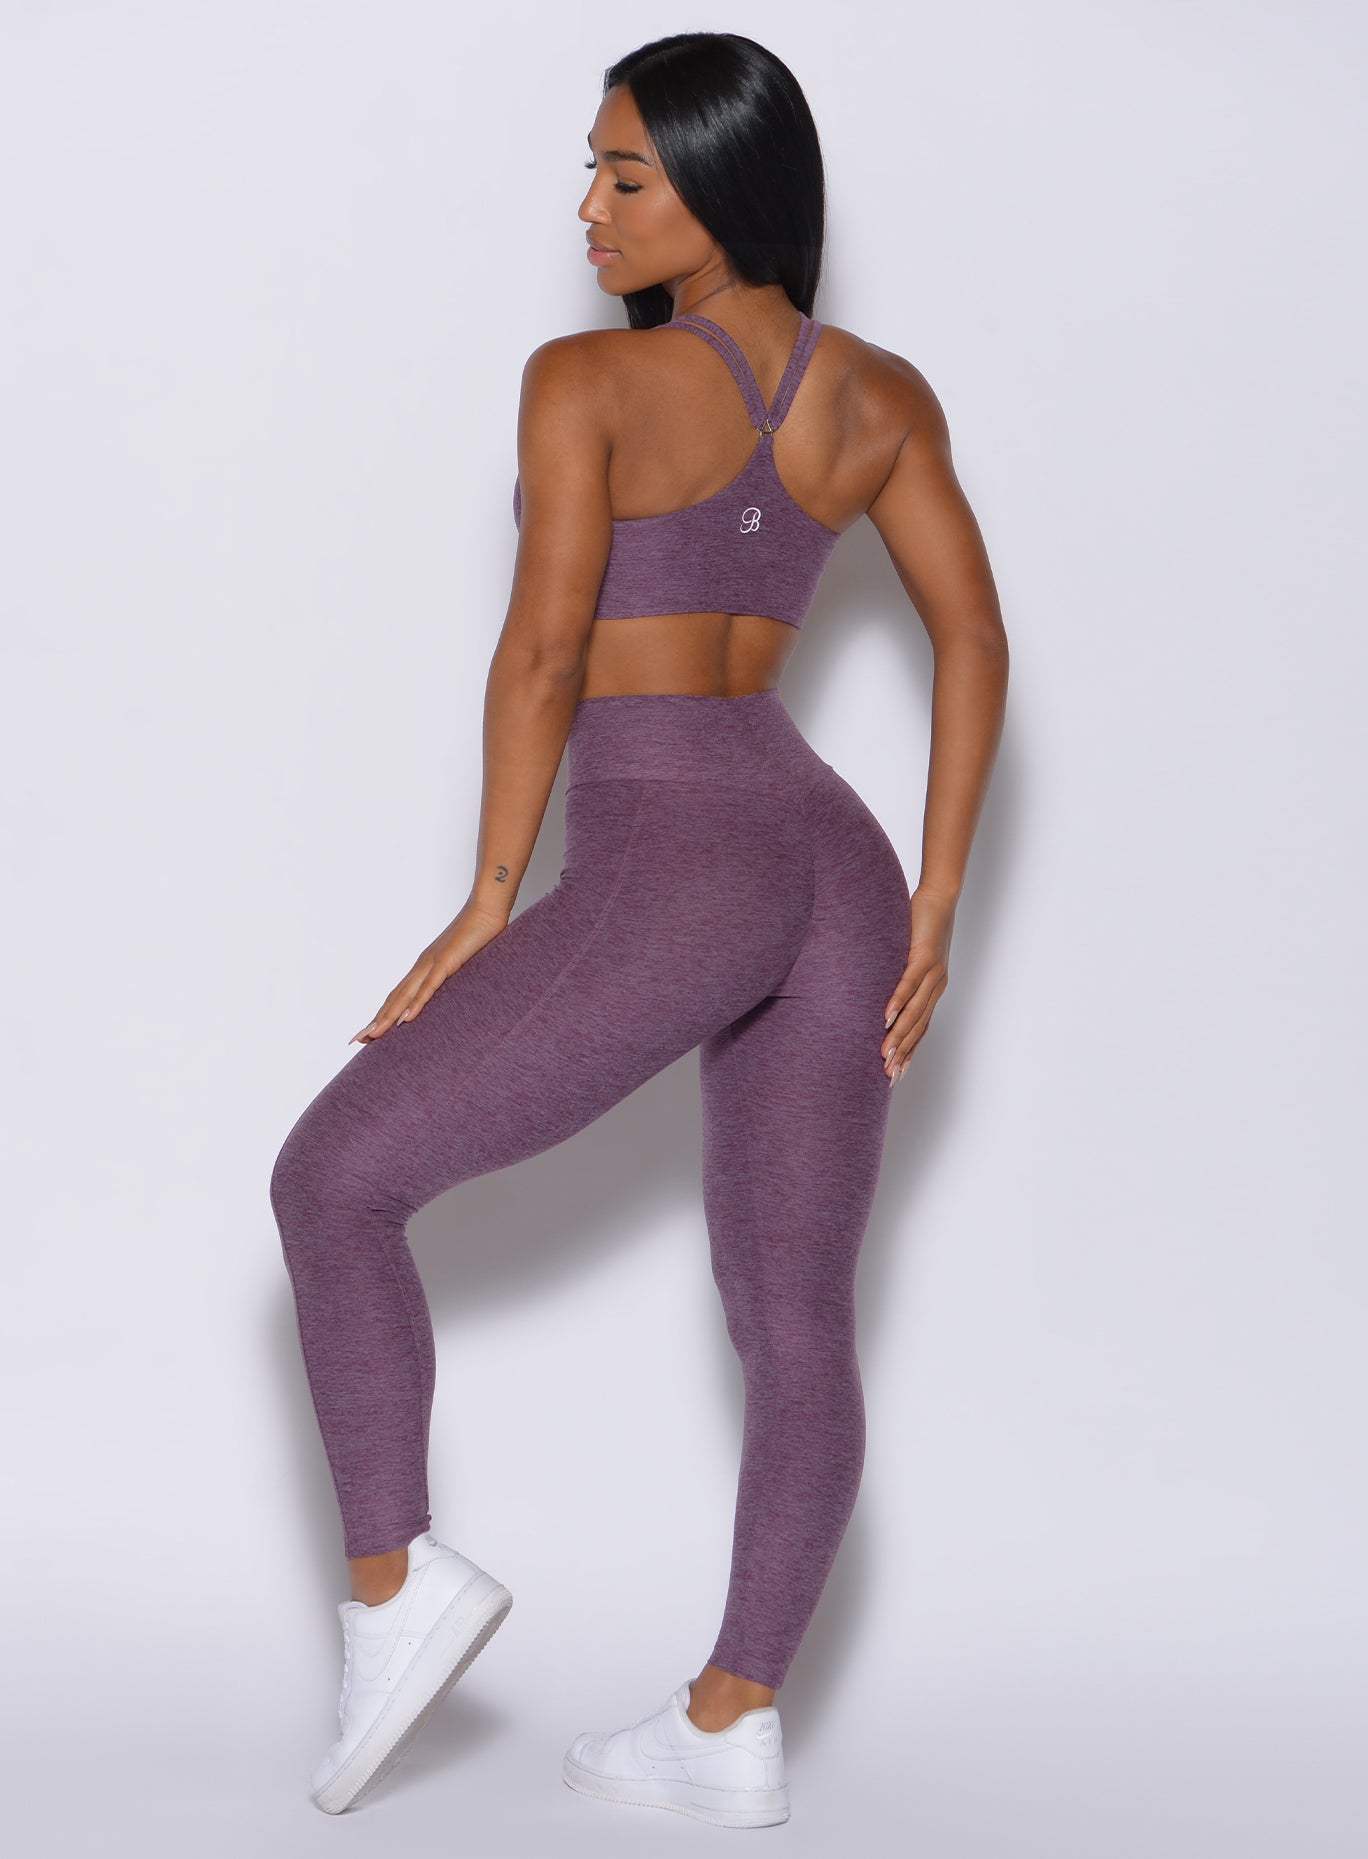 Back profile view of a model wearing our cloud leggings in regal purple color and a matching sports bra